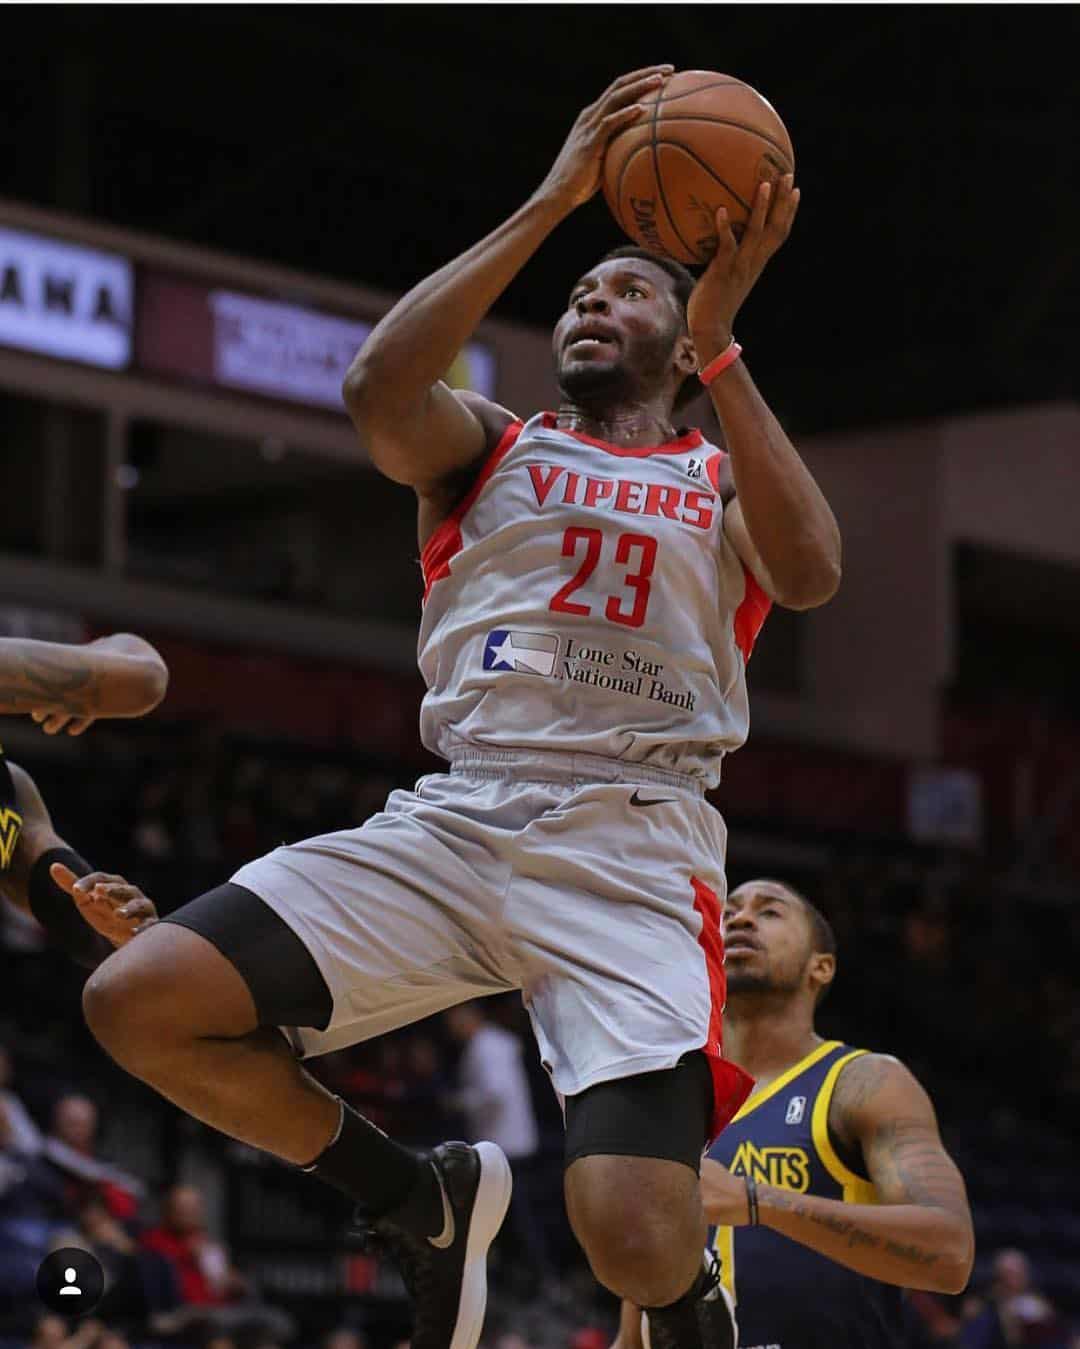 Onuaku playing for Vipers in G-League